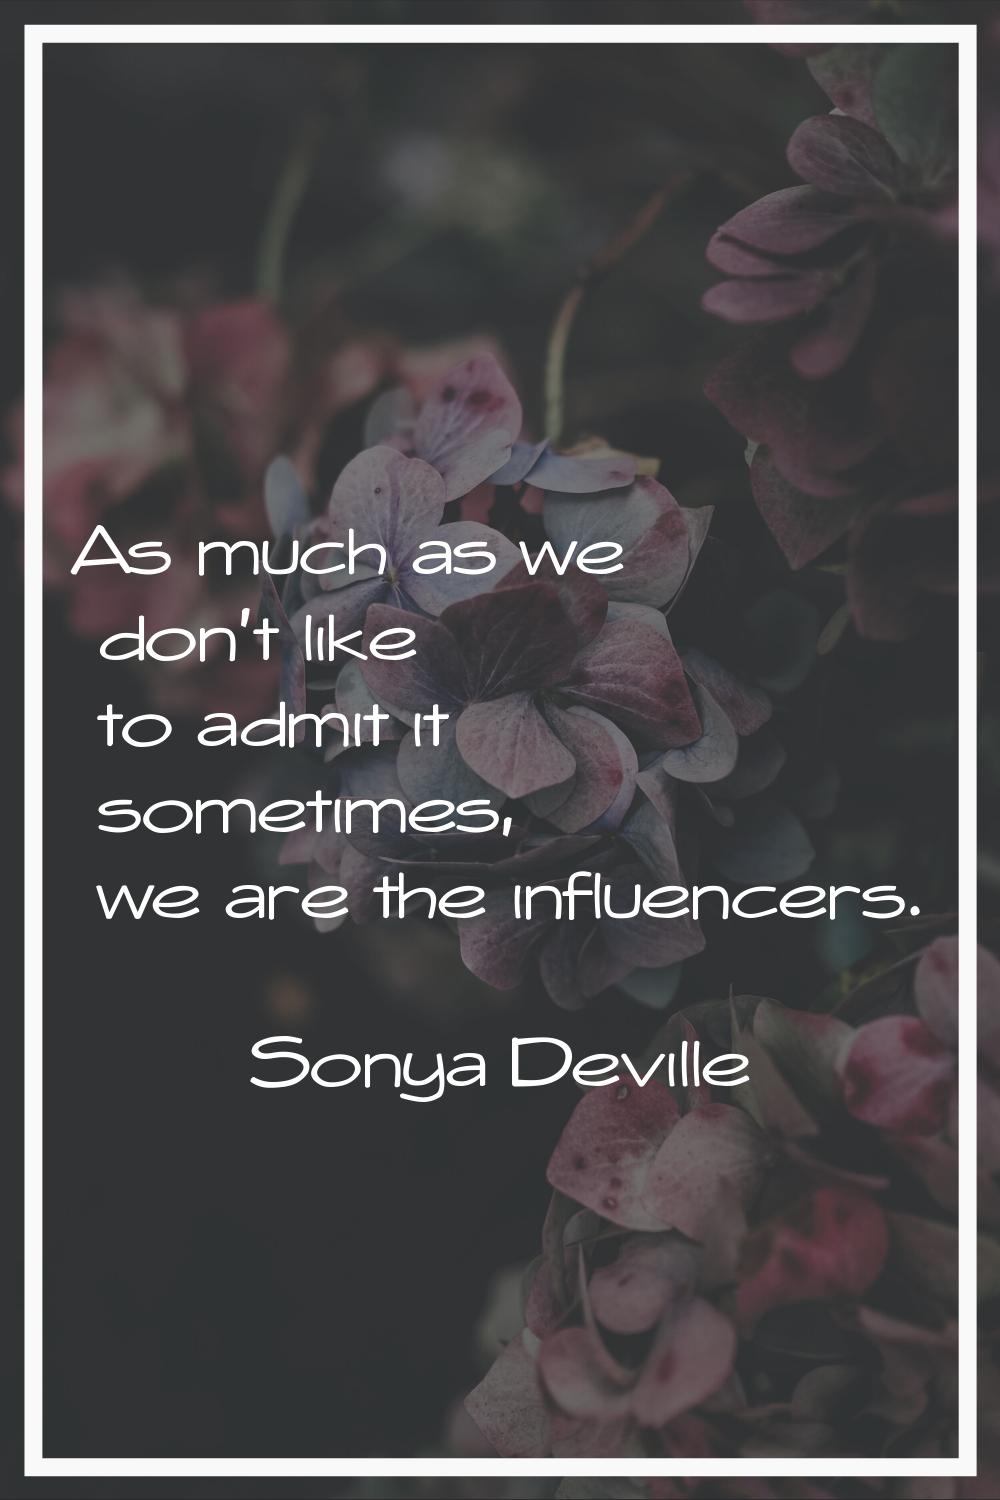 As much as we don't like to admit it sometimes, we are the influencers.